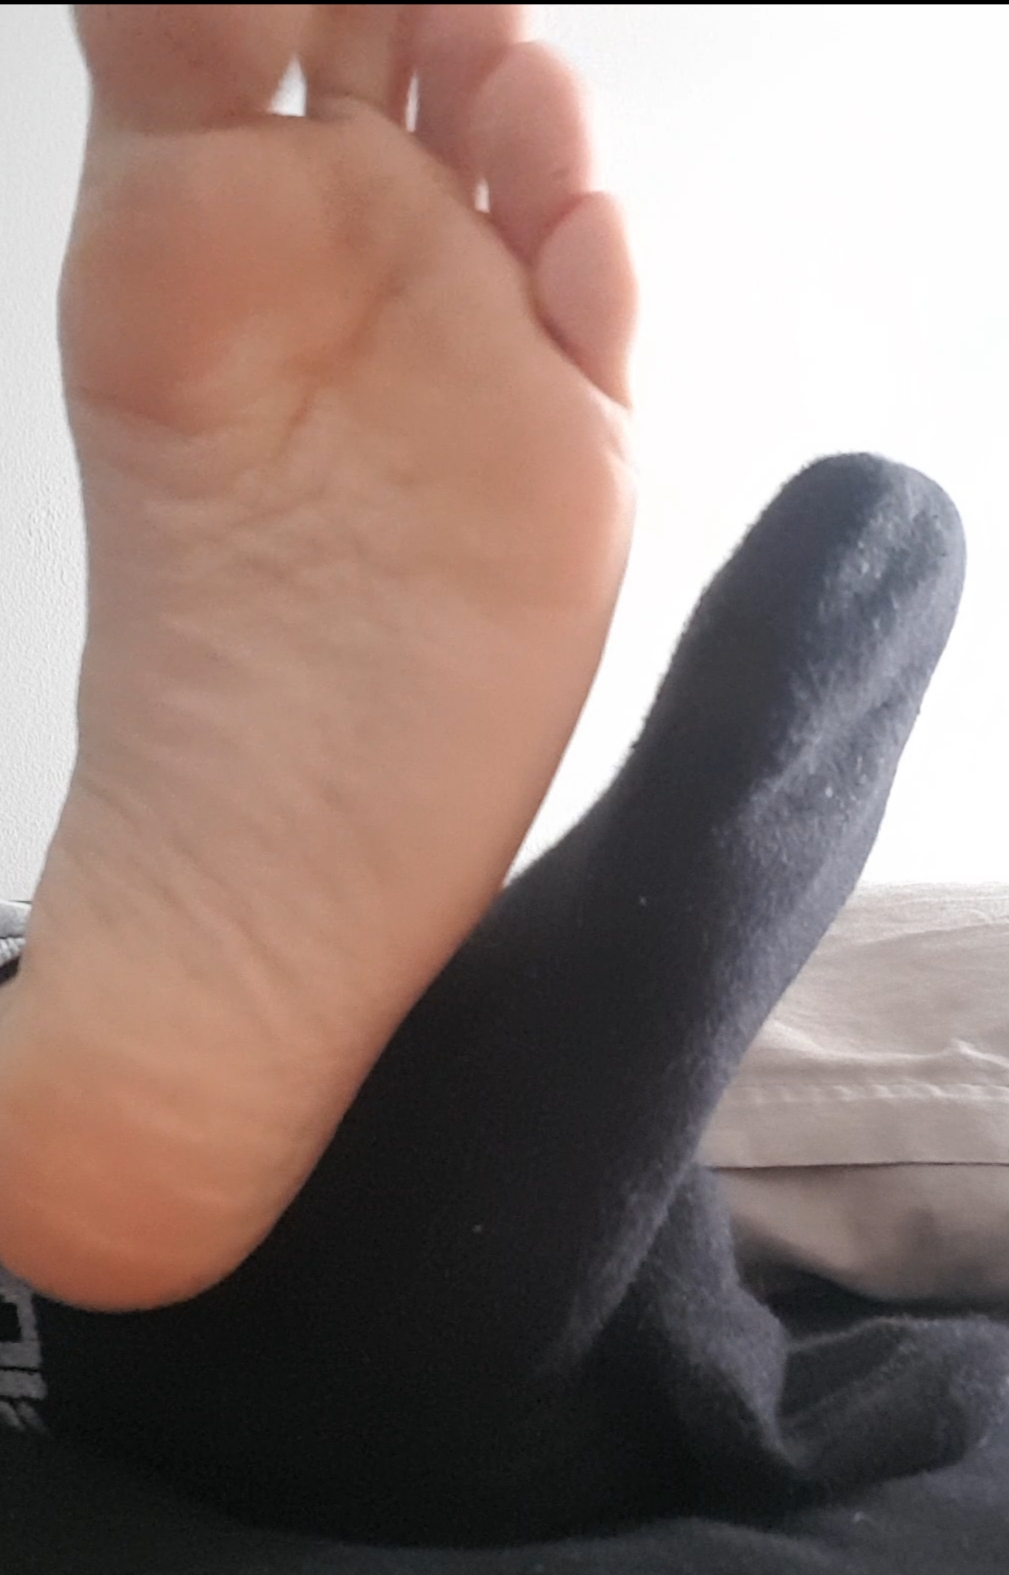 Smell those feet & lick the lint